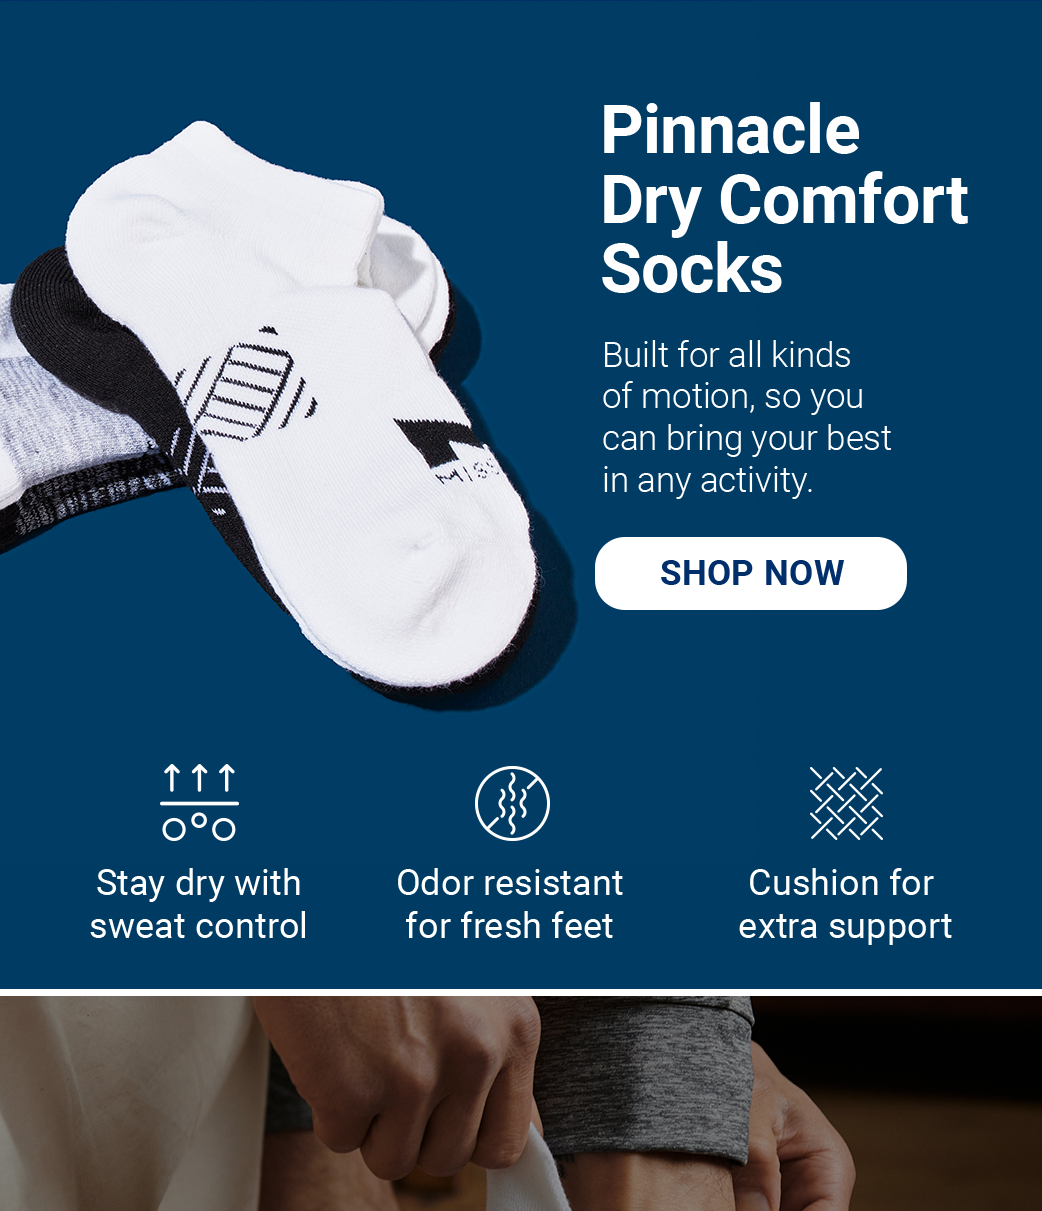 Pinnacle Dry Comfort Socks Built for all kinds of motion, so you can bring your best in any activity. [SHOP NOW] Stay dry with sweat control Odor resistant for fresh feet Cushion for extra support